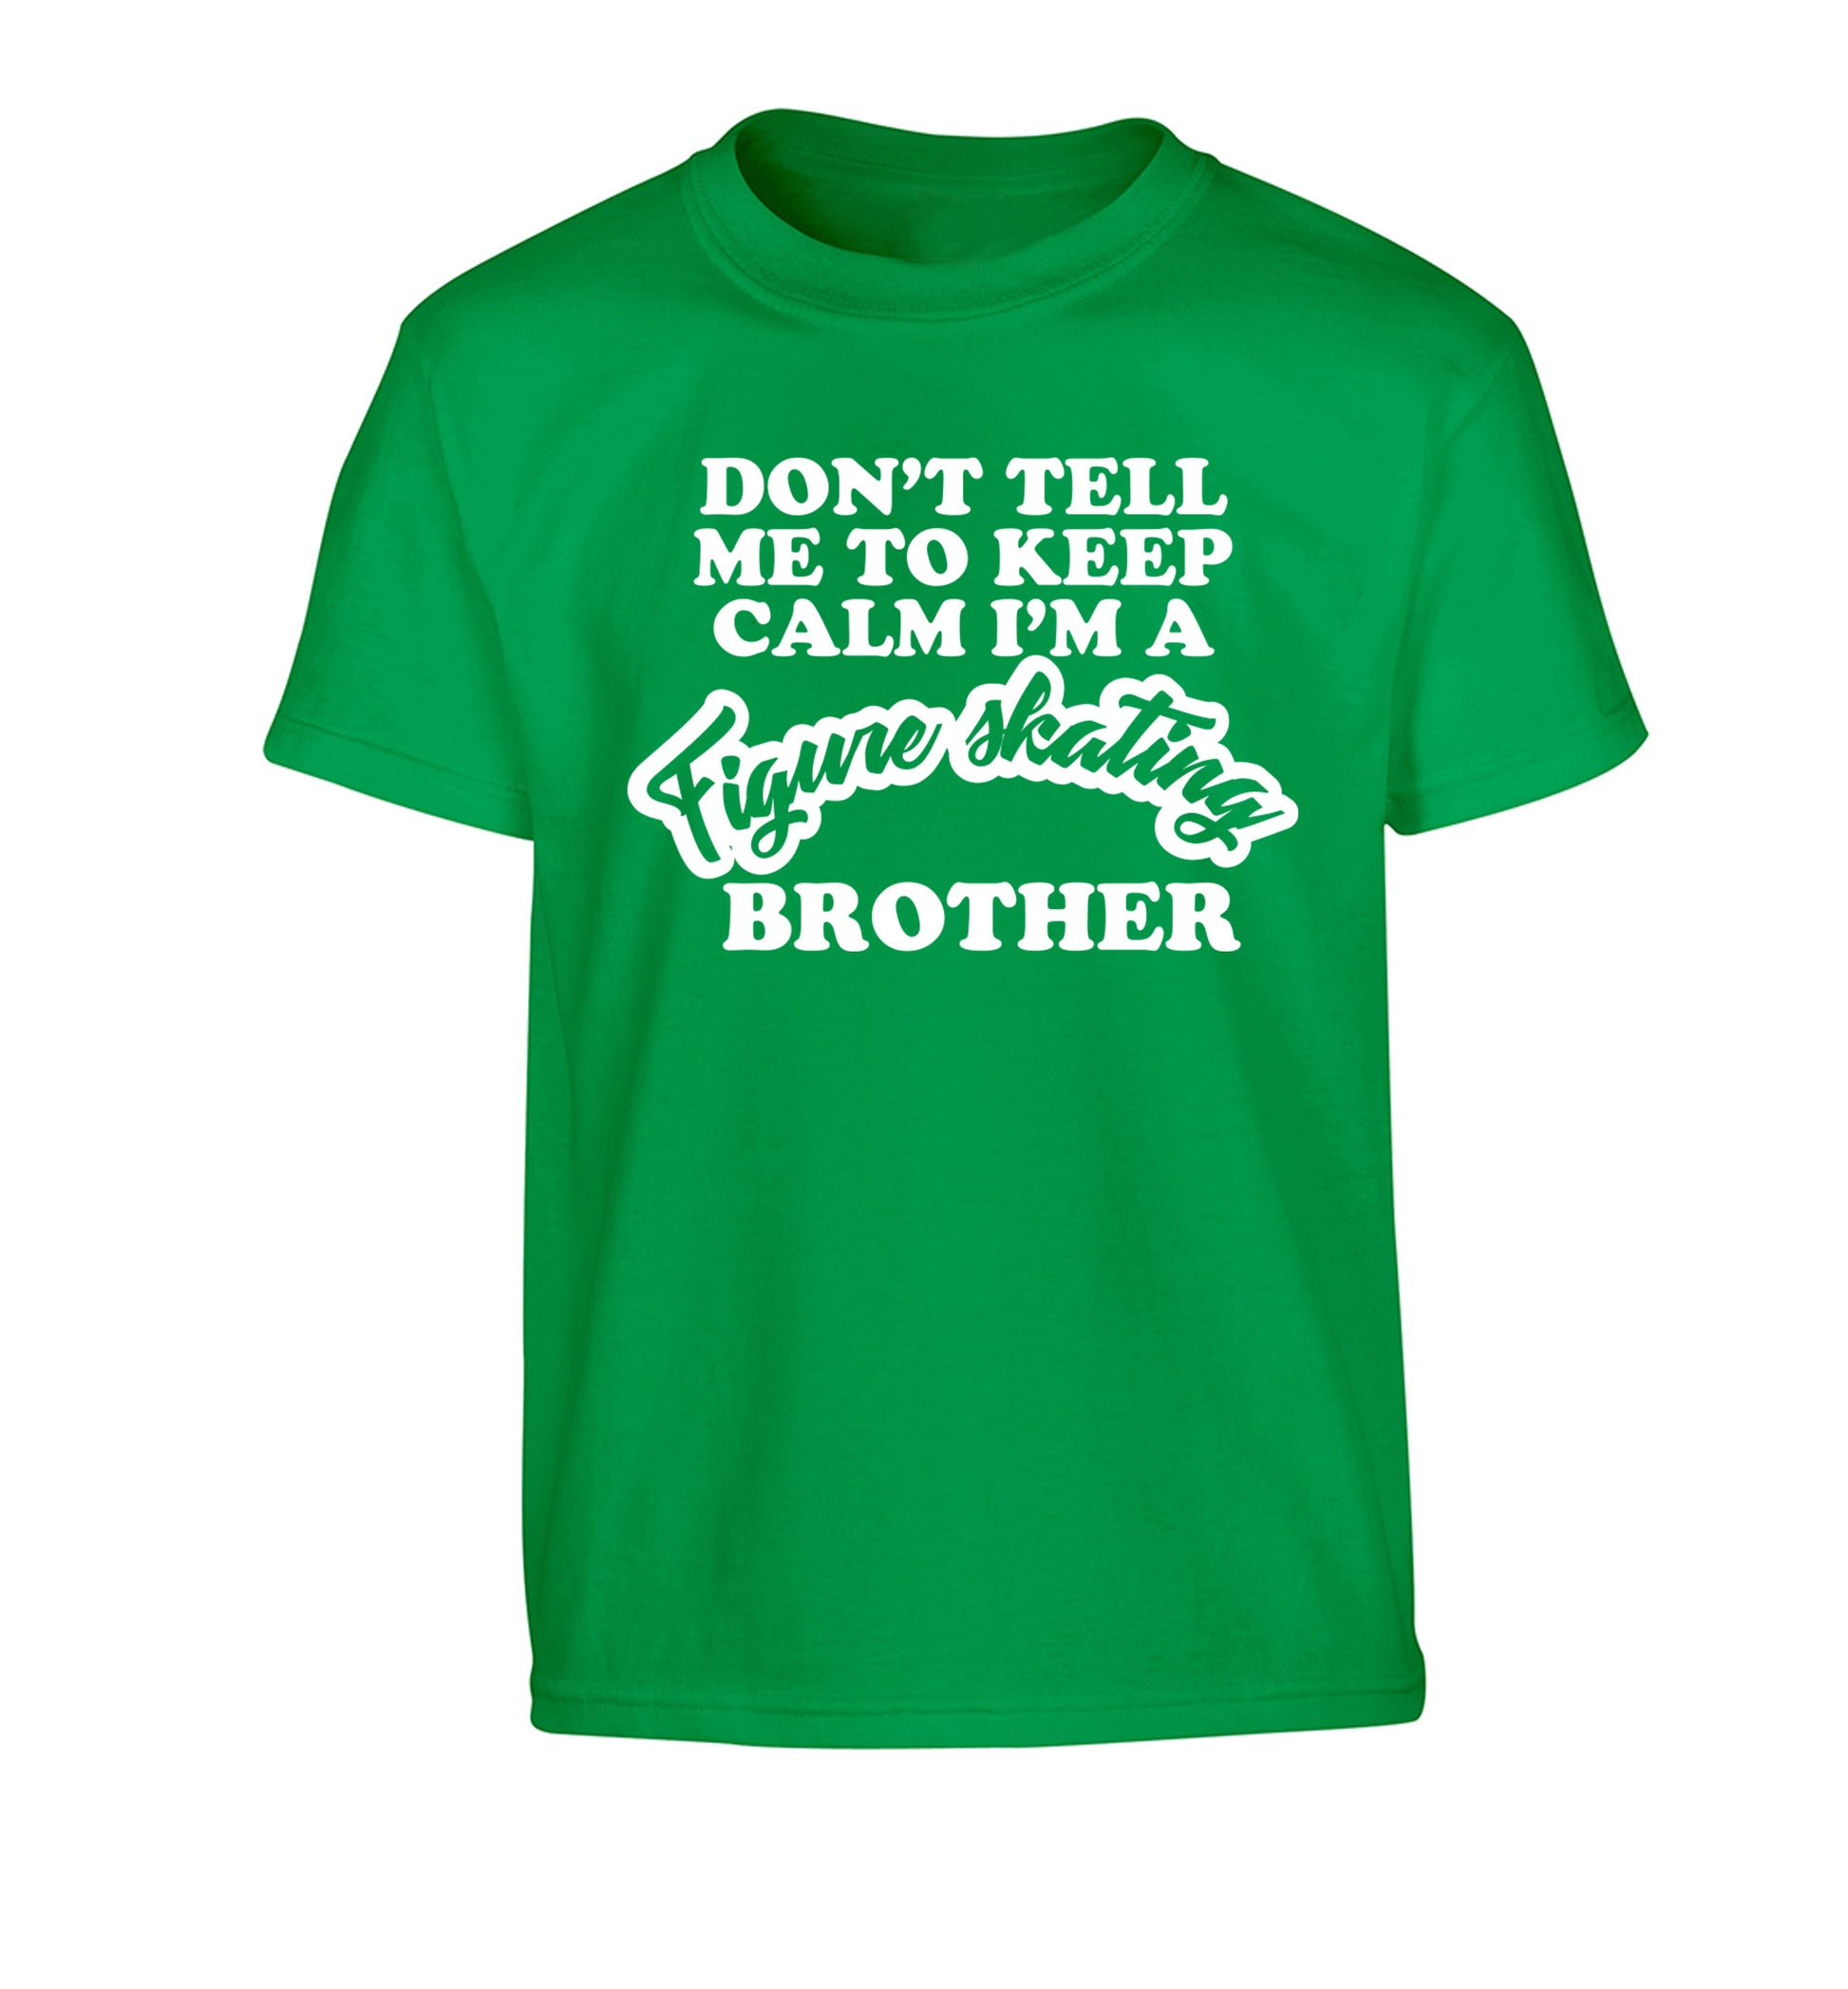 Don't tell me to keep calm I'm a figure skating brother Children's green Tshirt 12-14 Years